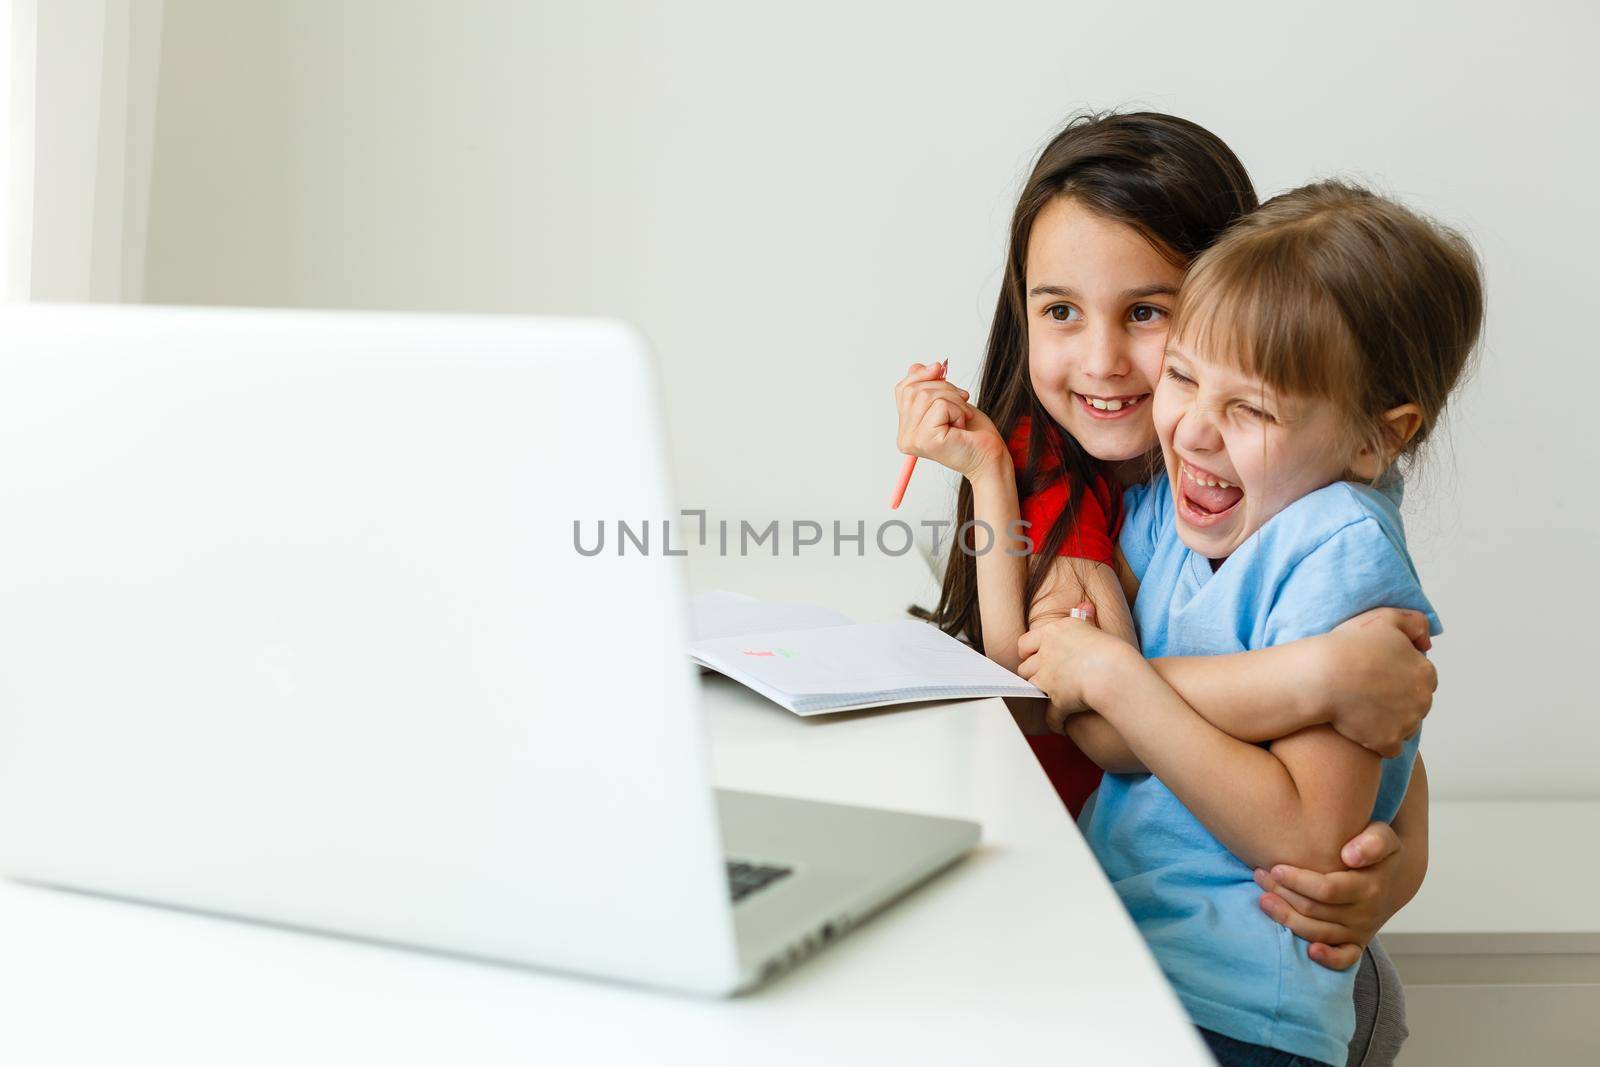 Two girls, the oldest and the youngest, are engaged at a table on a laptop.